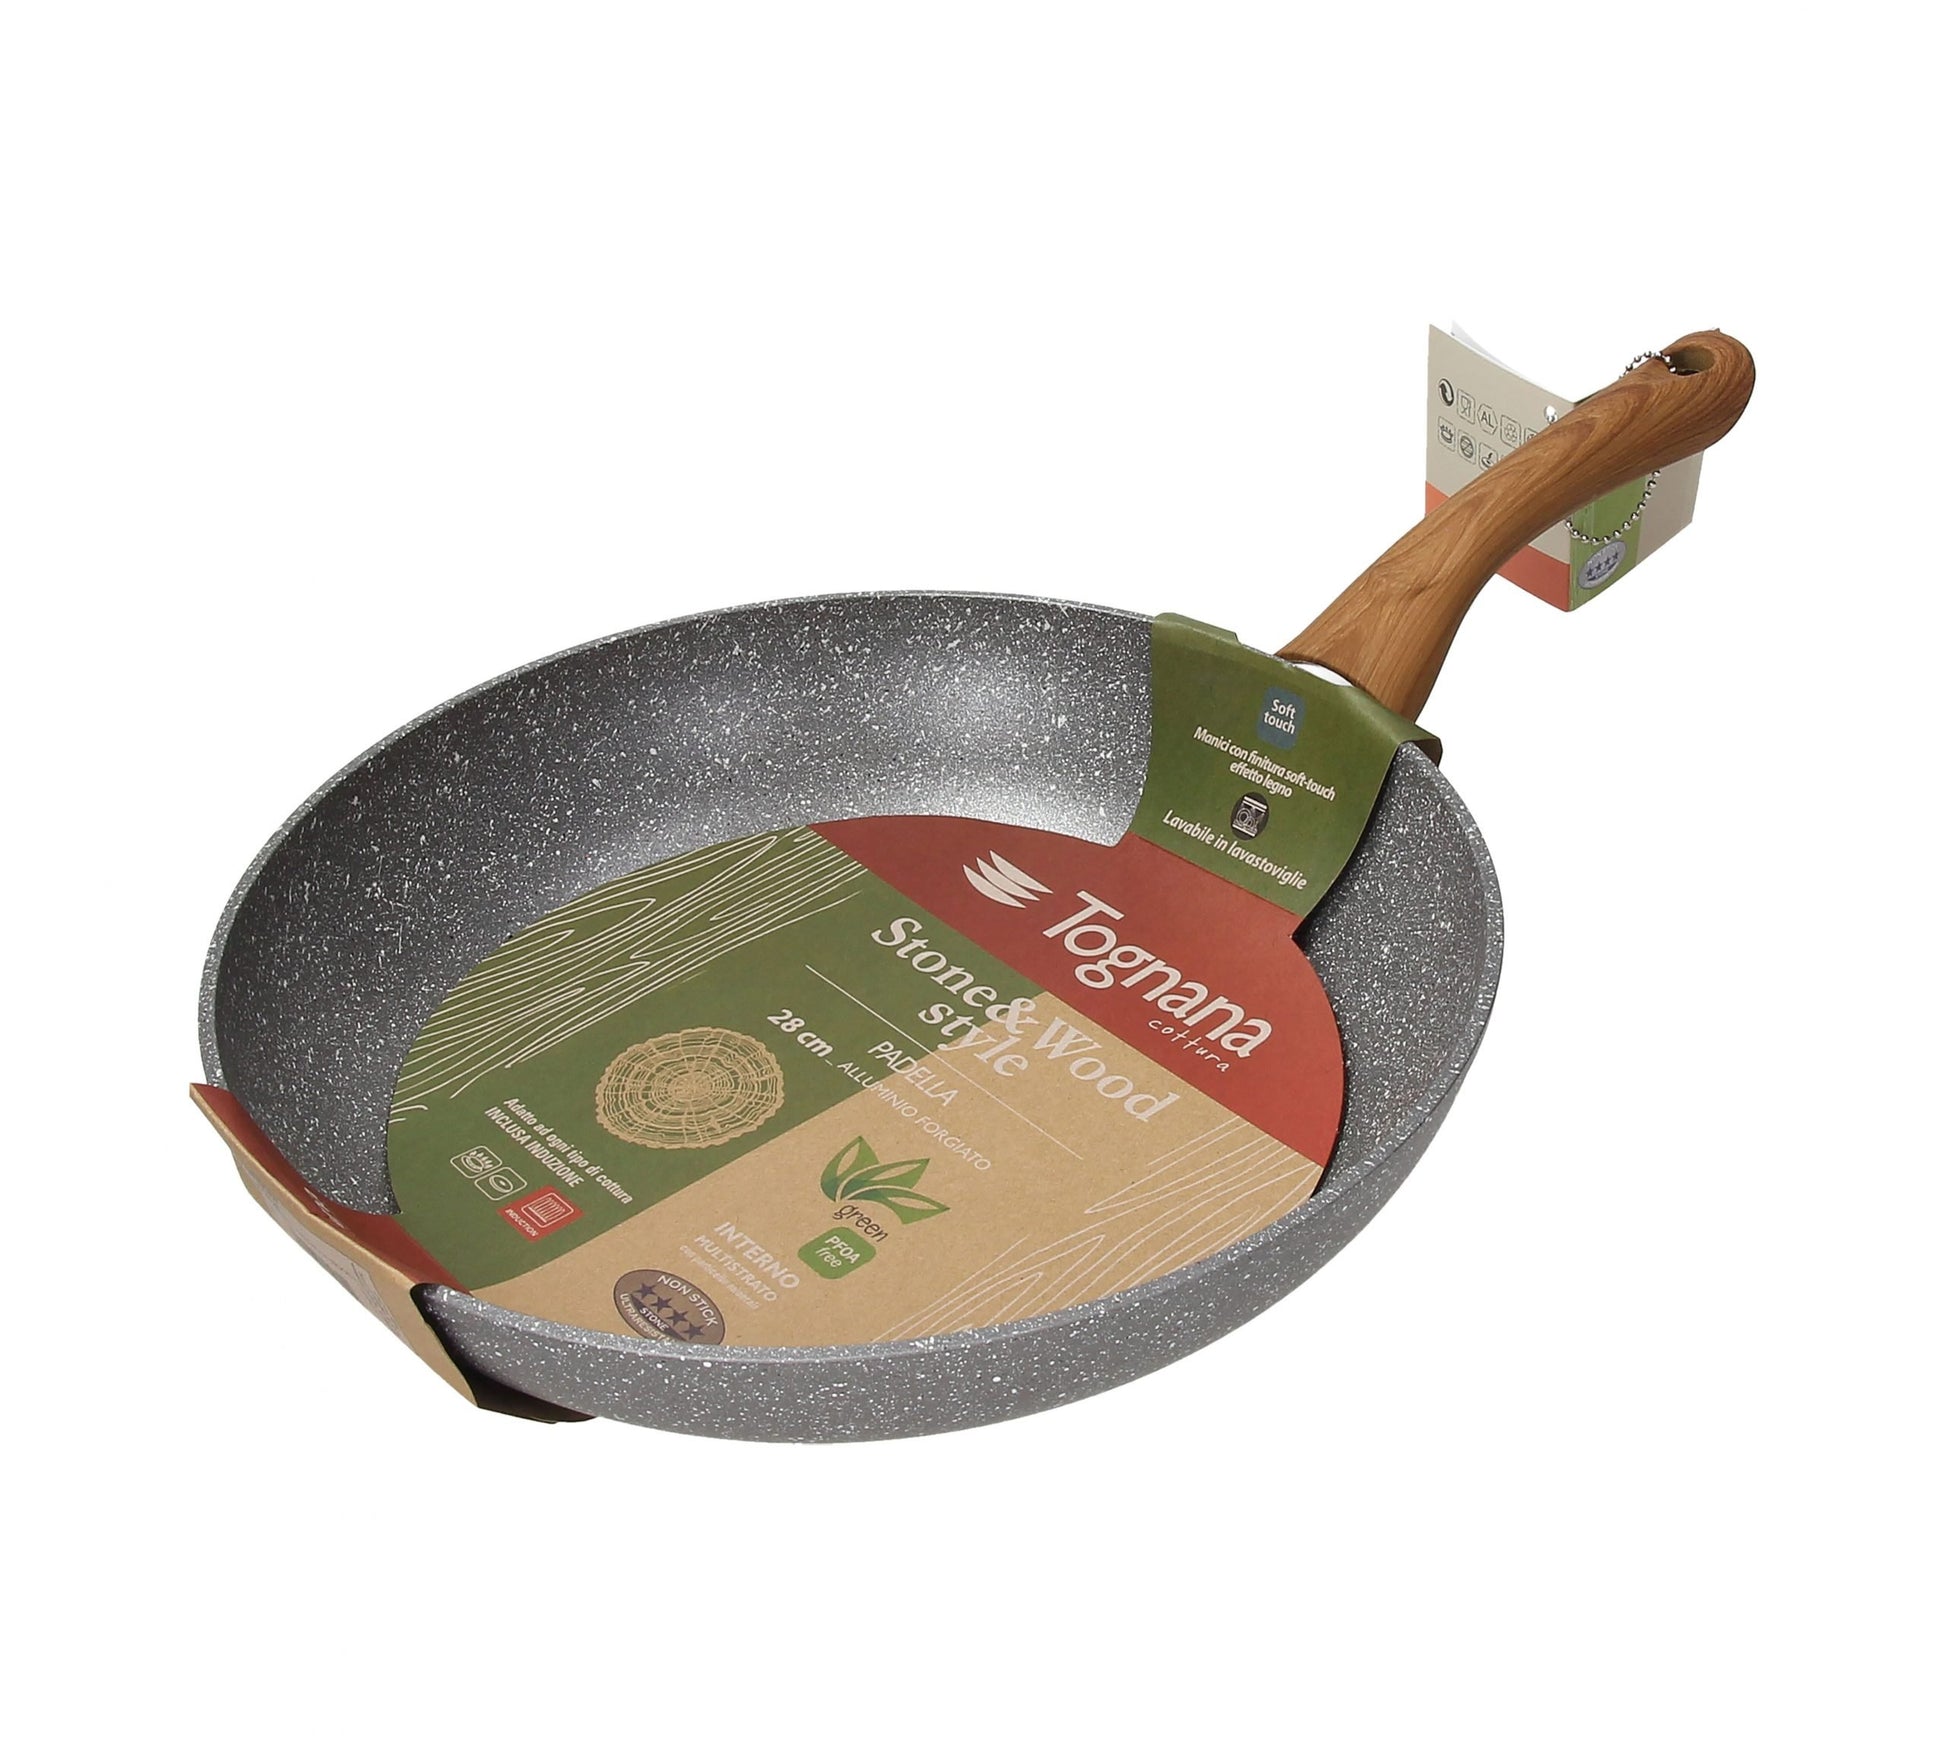 Is Woodstone Cookware Safe?